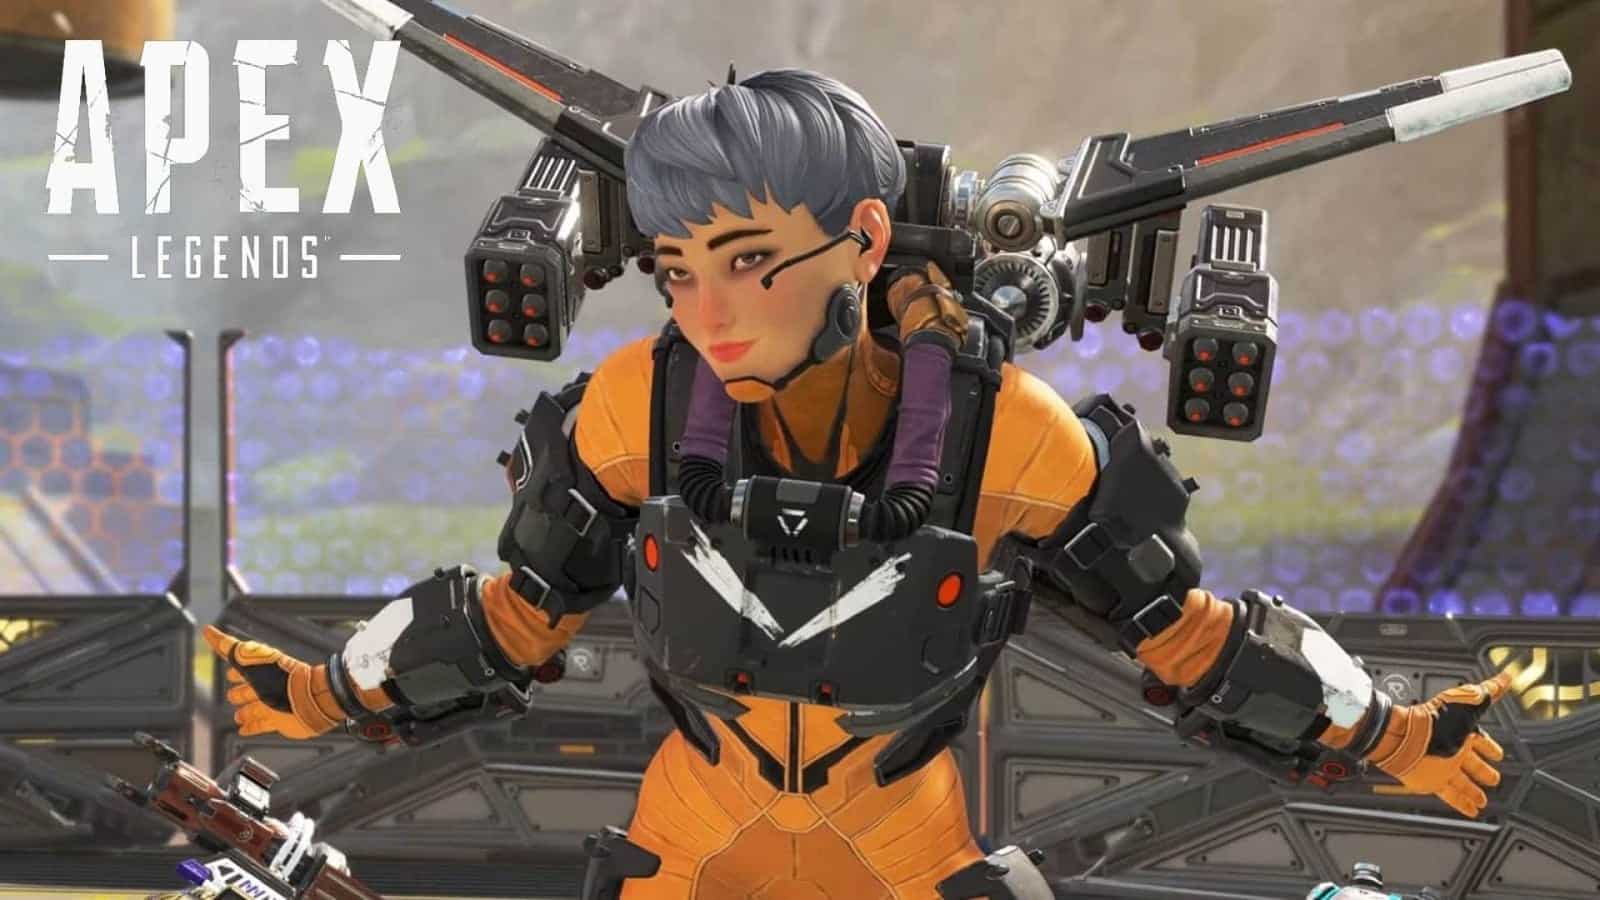 Valkyrie bowing in Apex Legends